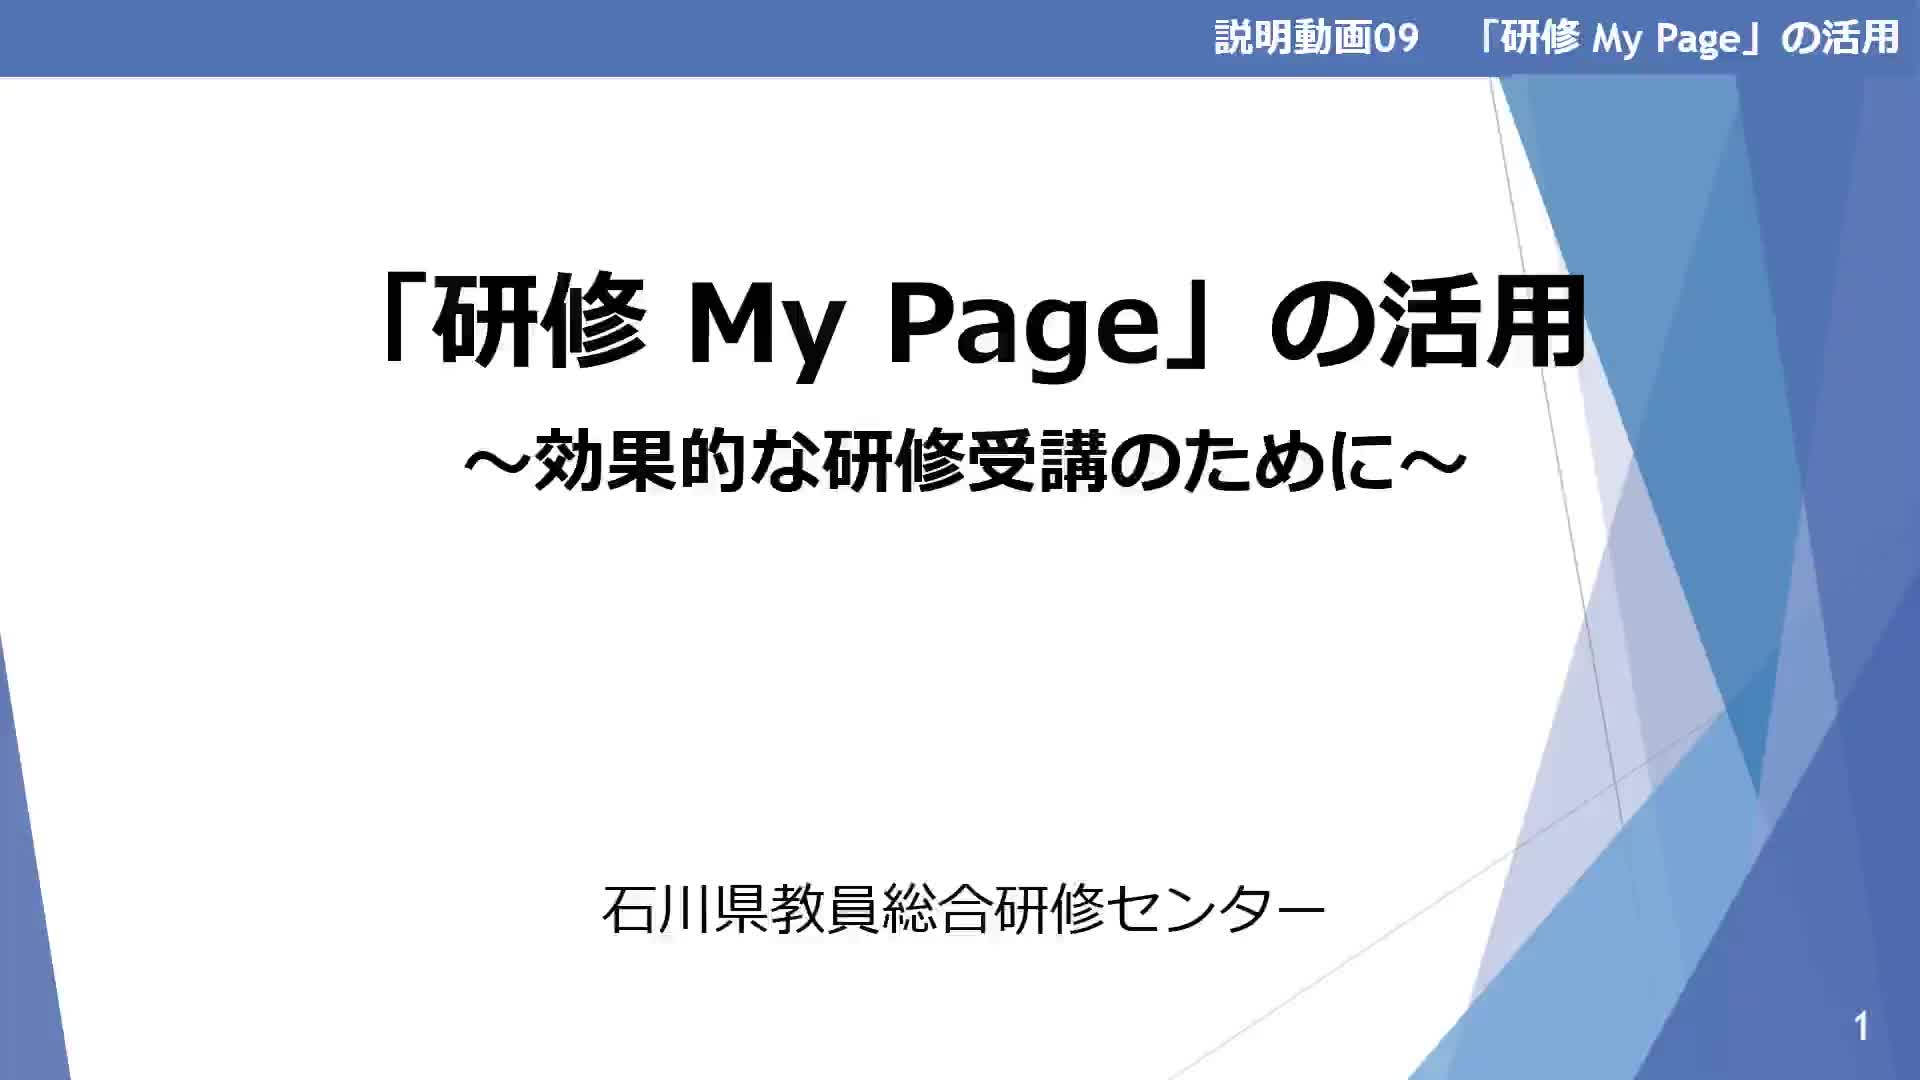 09_R3_【「研修 My Page」の活用～効果的な研修受講のために～】